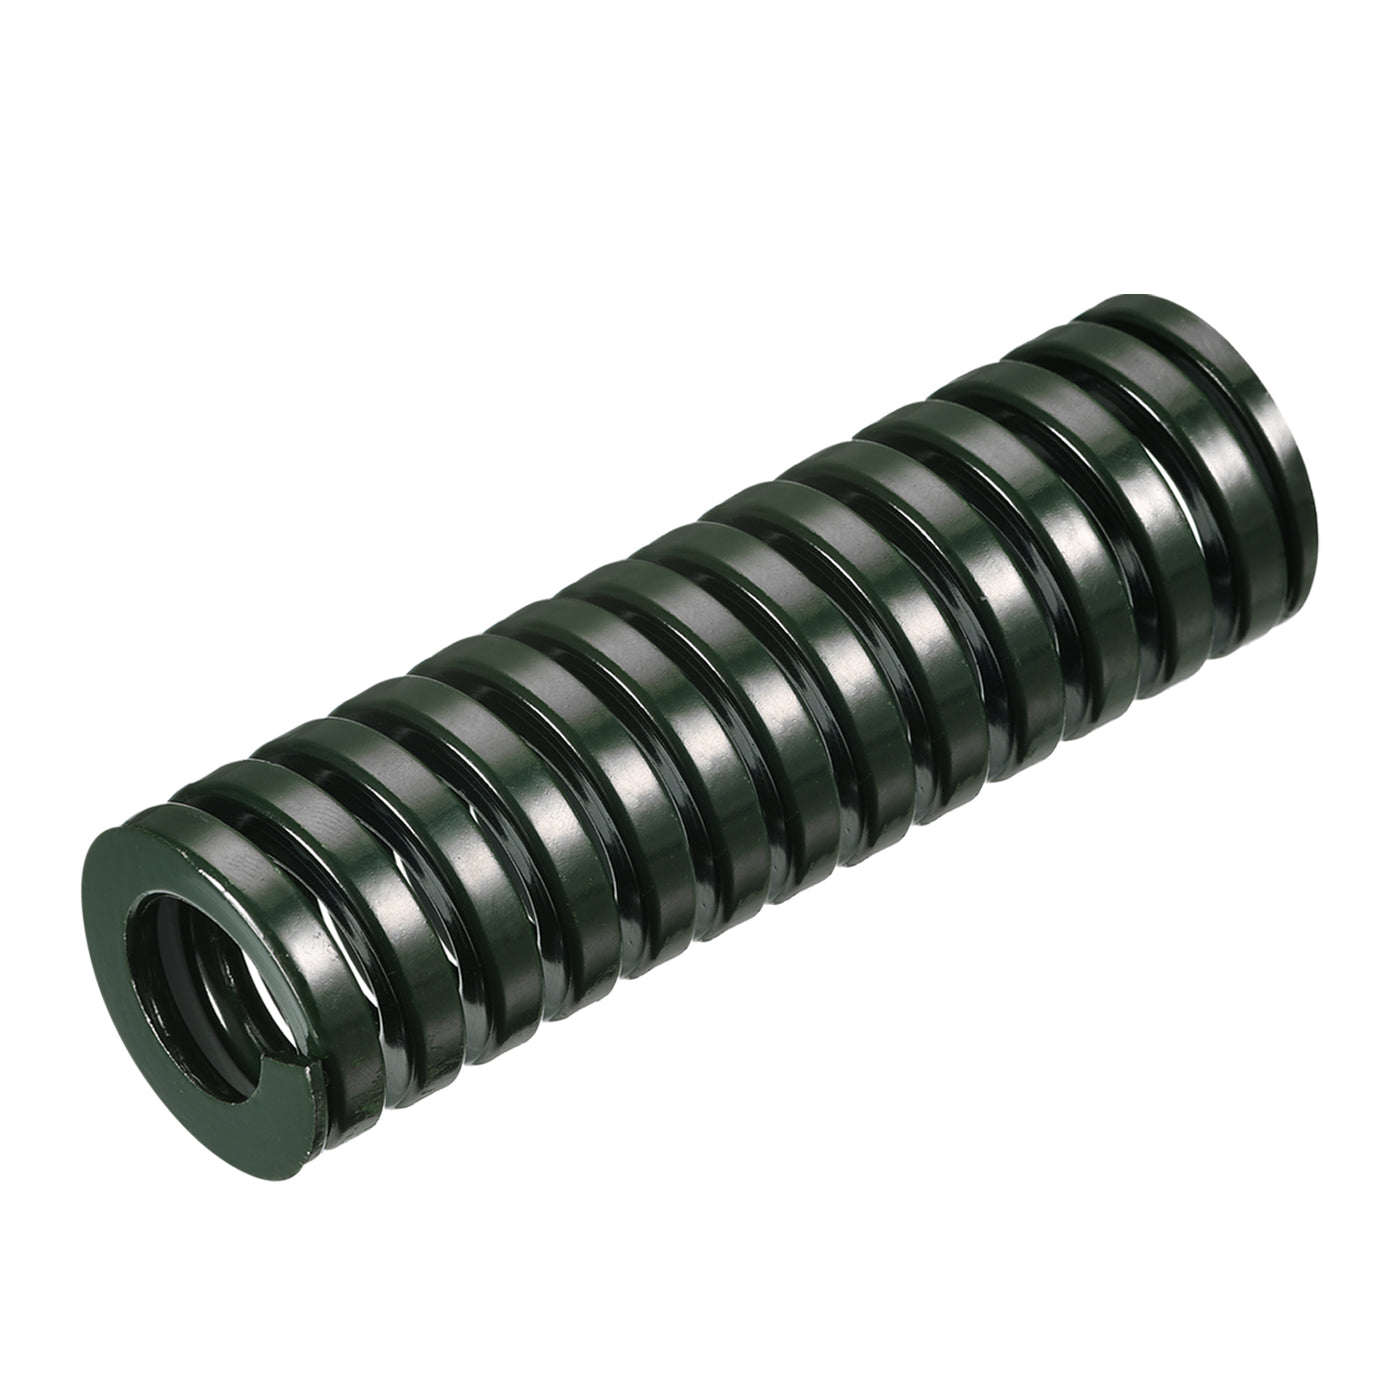 uxcell Uxcell 3D Printer Die Spring, 1pcs 30mm OD 100mm Long Spiral Stamping Compression Green